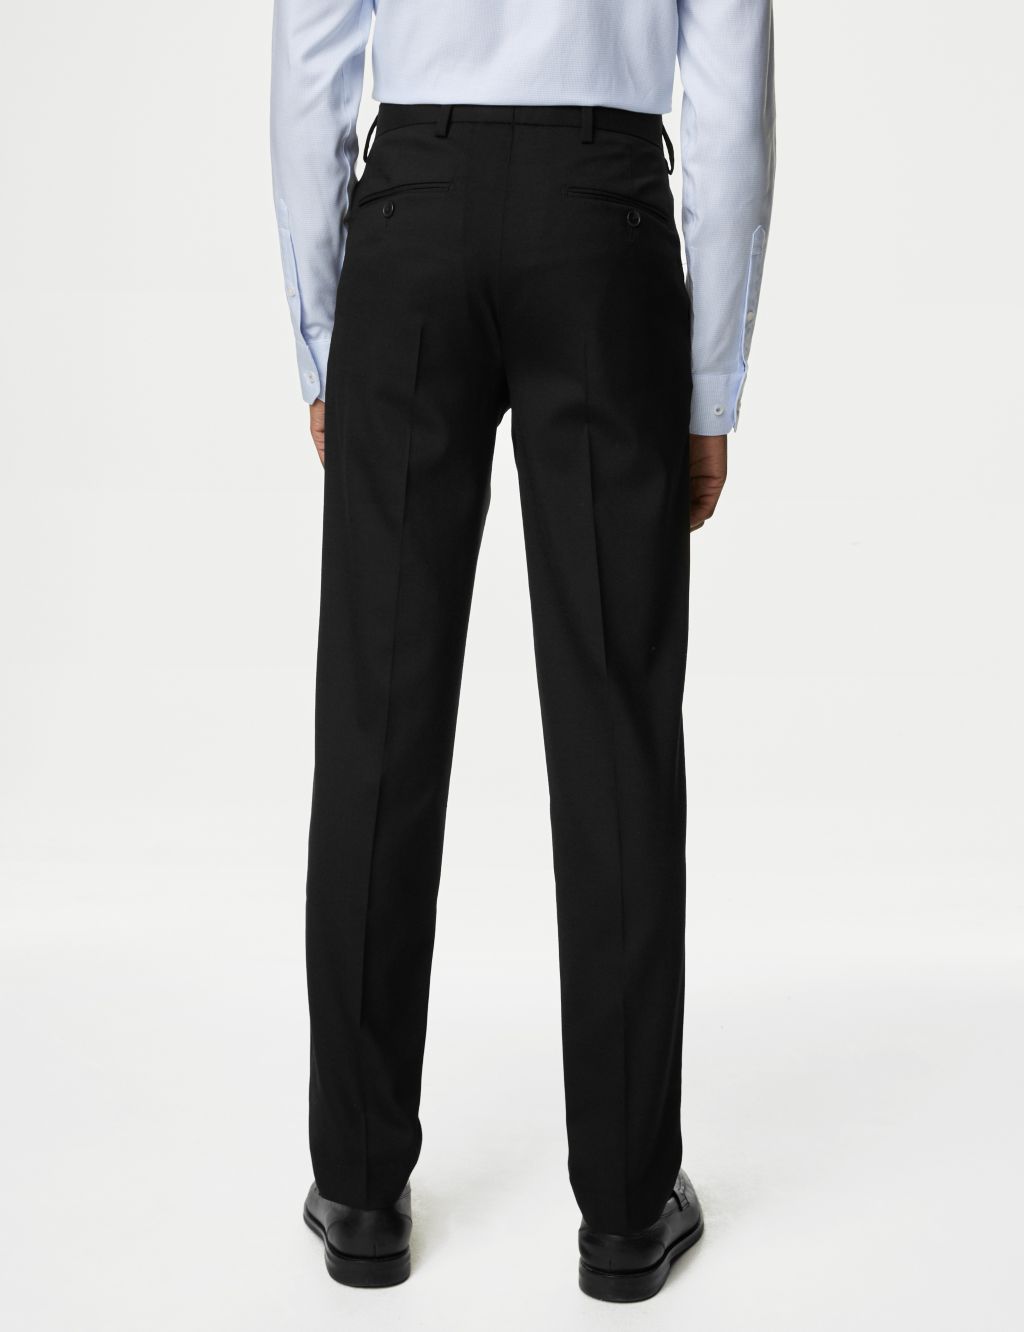 Wool Blend Flat Front Stretch Trousers image 5